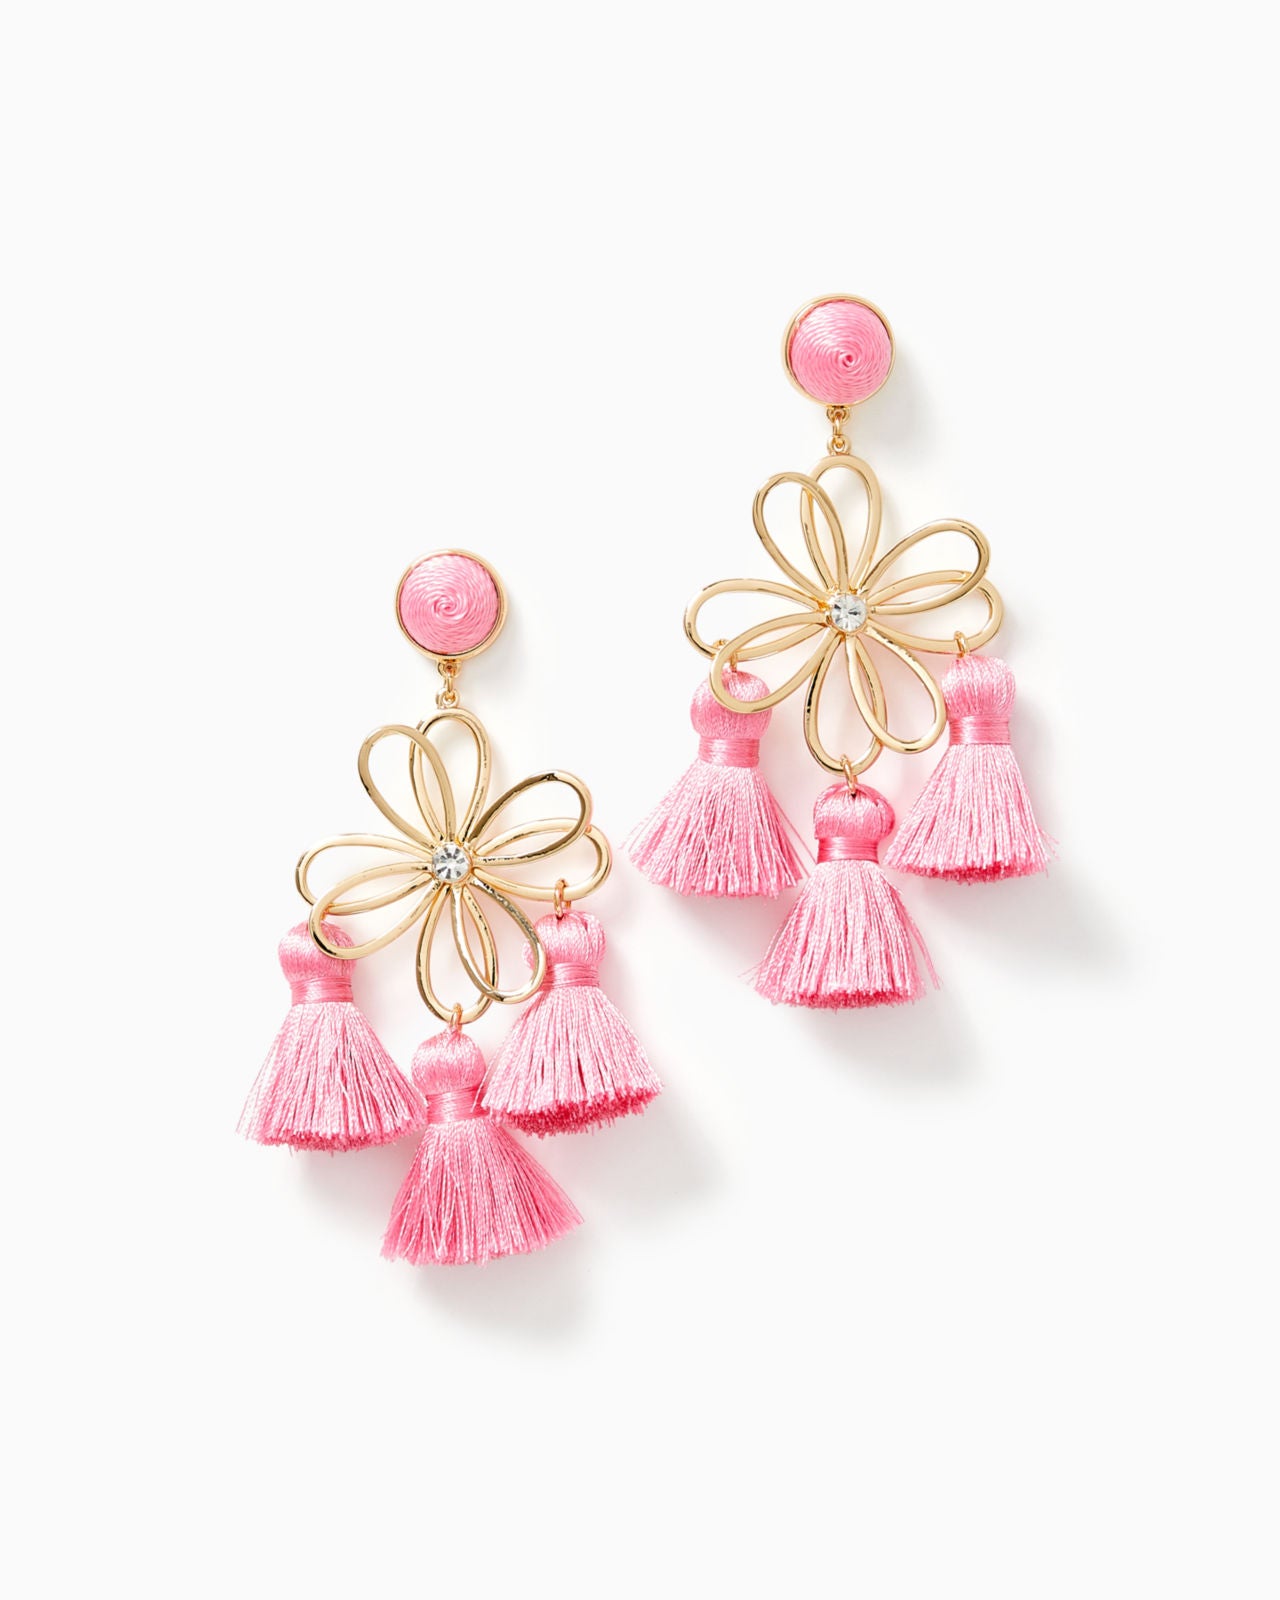 Come On Clover Earrings